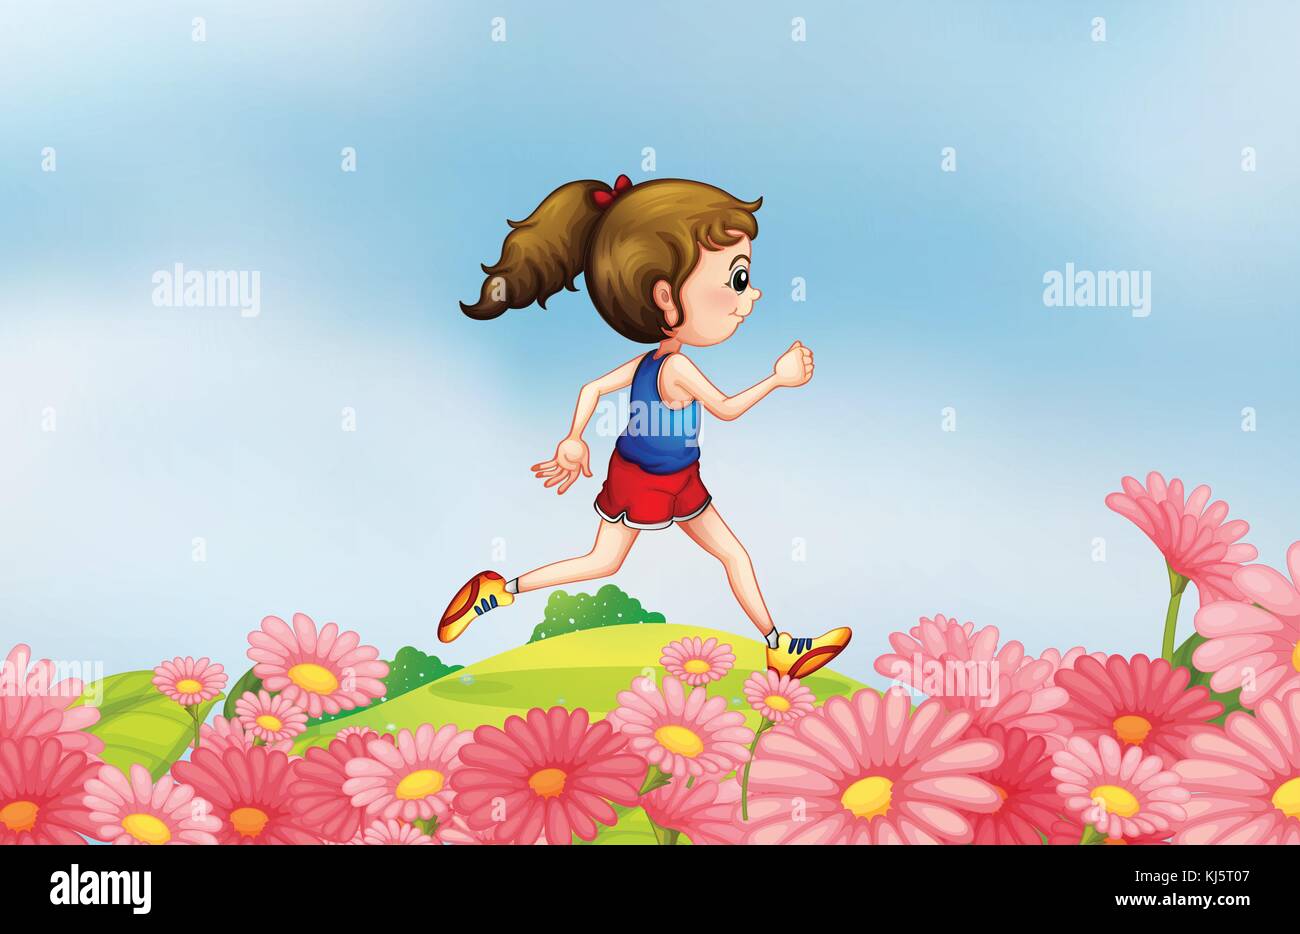 Illustration of a girl running along the hill with a garden Stock Vector